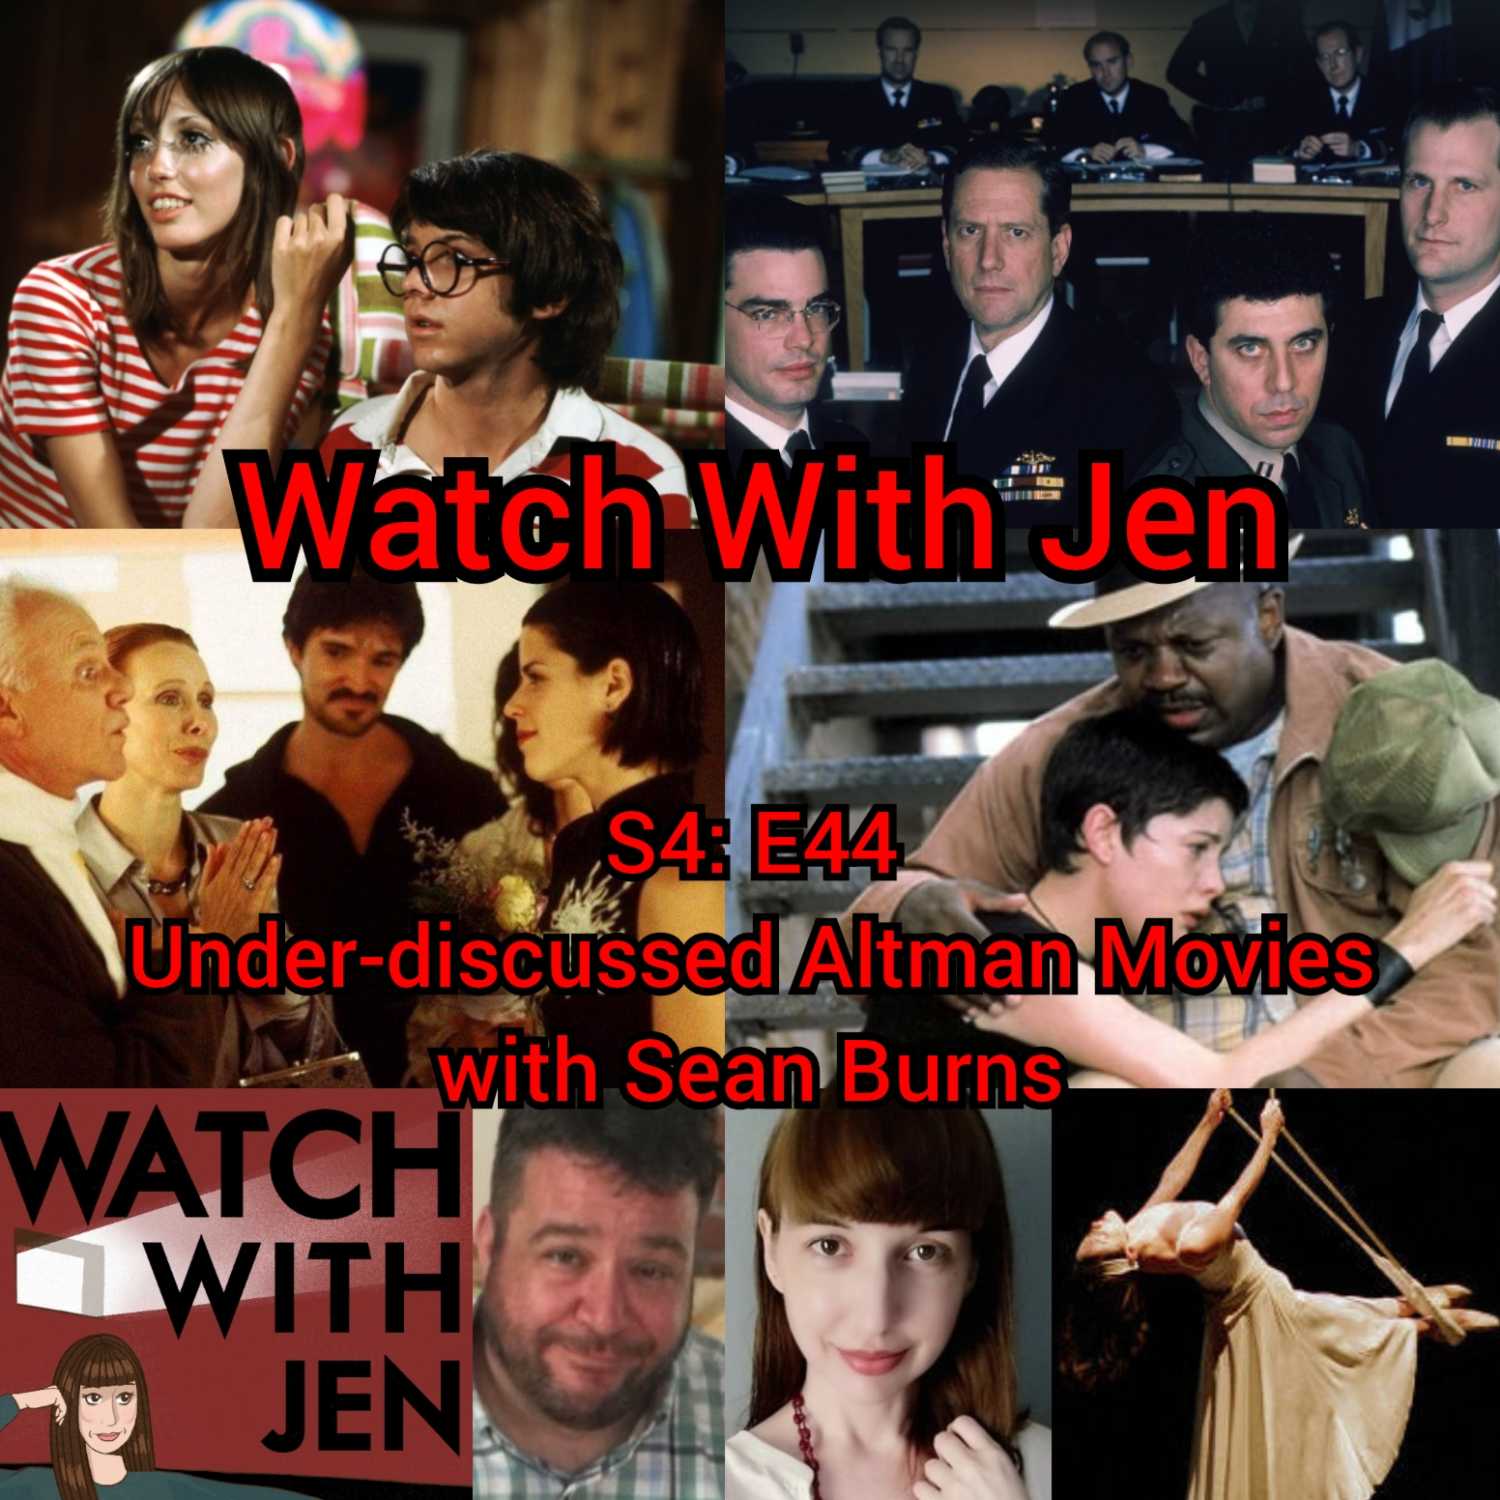 Watch With Jen - S4: E44 - Under-discussed Altman Movies with Sean Burns